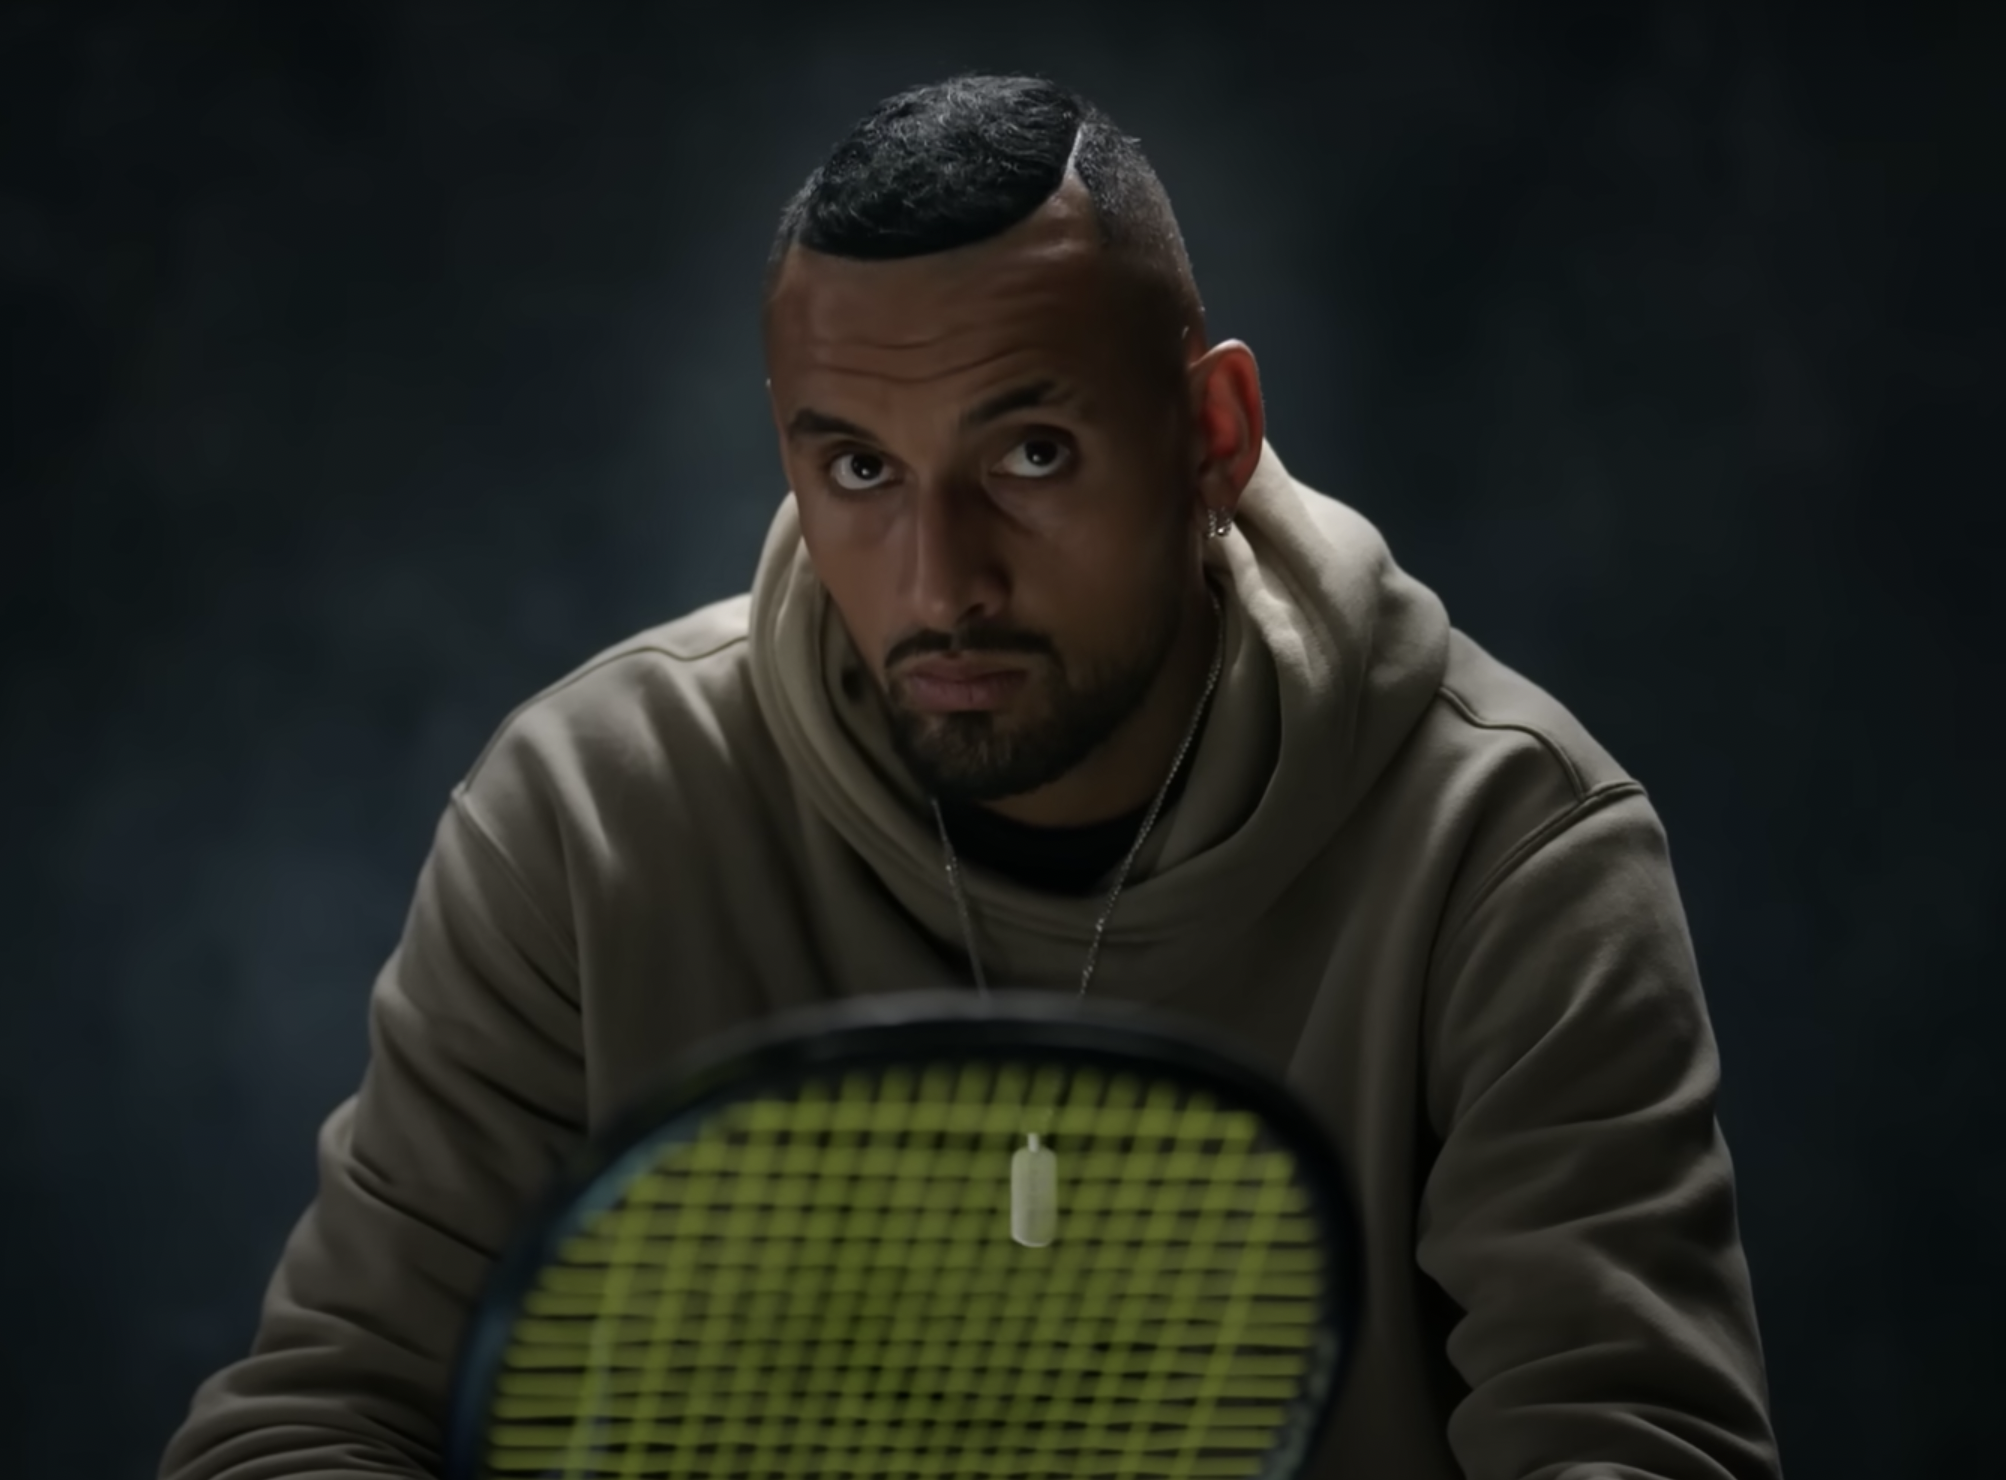 Netflix's tennis series Break Point: Release date for new episodes, which  players feature, episode guide